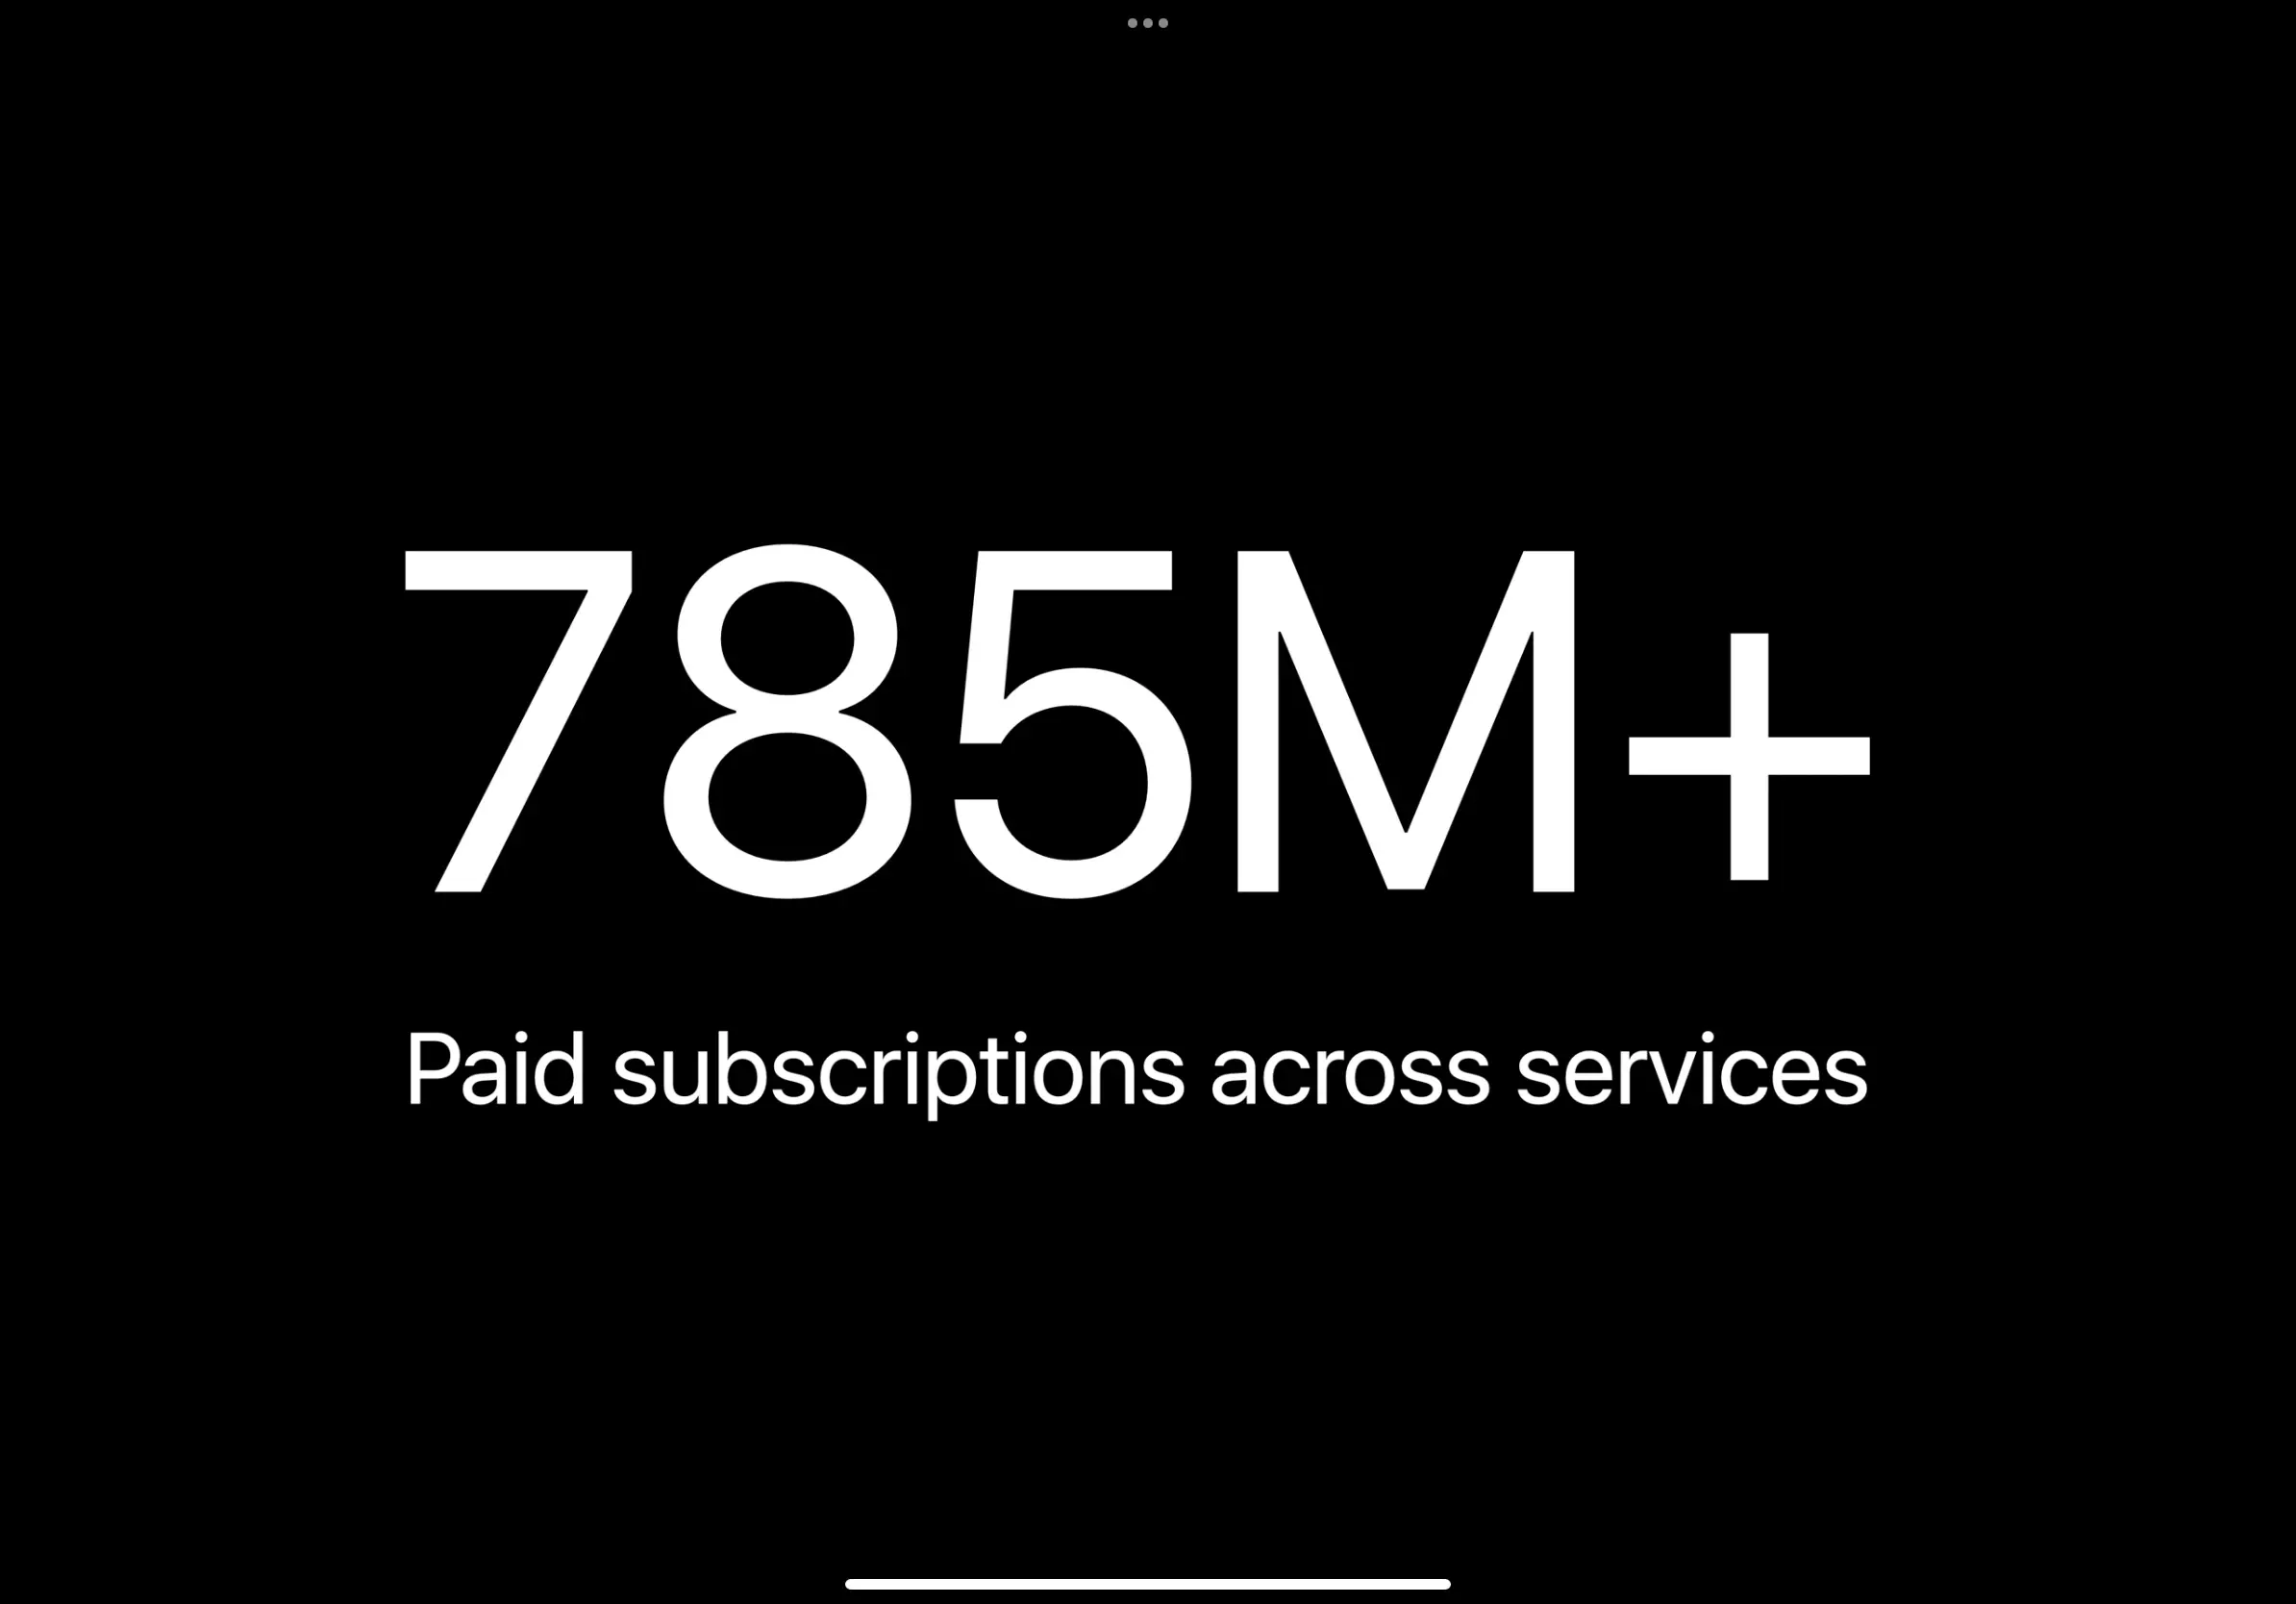 Apple has 785M+ subscribers across paid services.